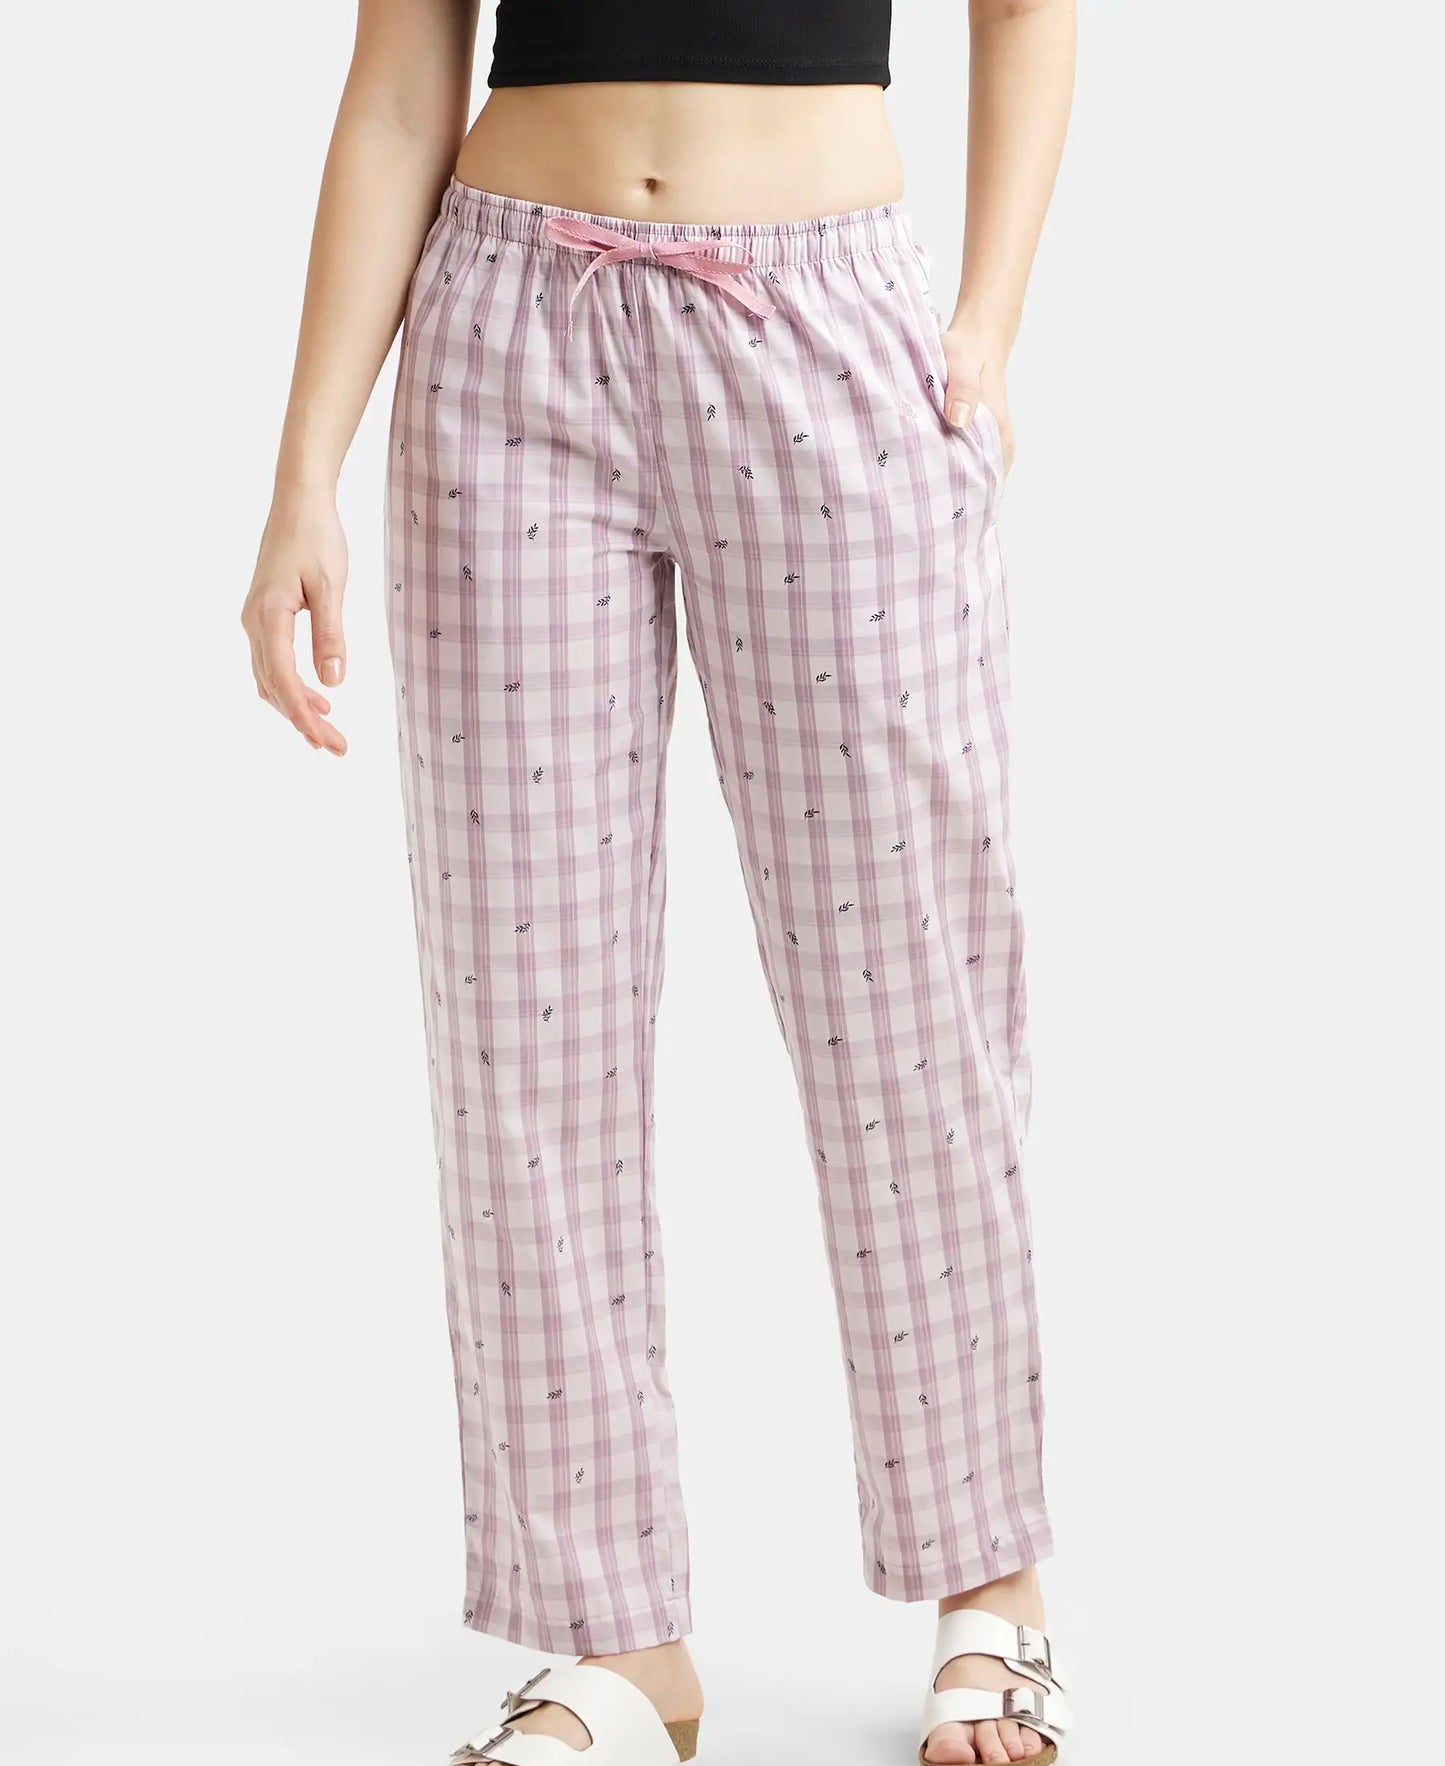 Super Combed Cotton Woven Fabric Relaxed Fit Striped Pyjama with Side Pockets - Old Rose Assorted Checks-5